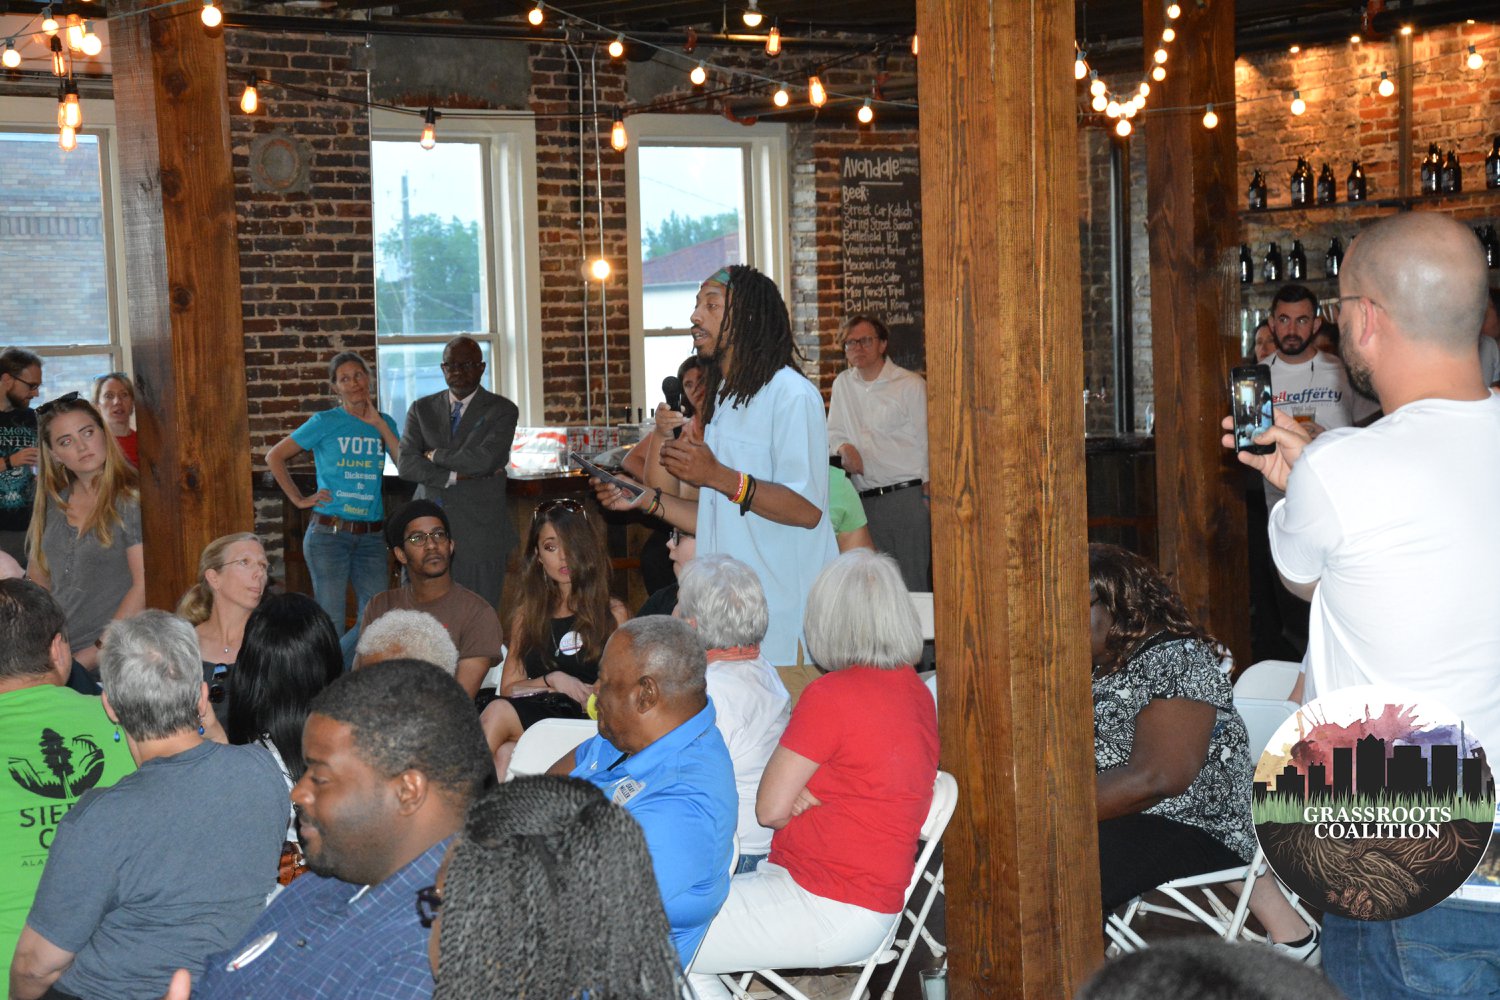 Grassroots Coalition 7 more ways to support social justice in Birmingham right now